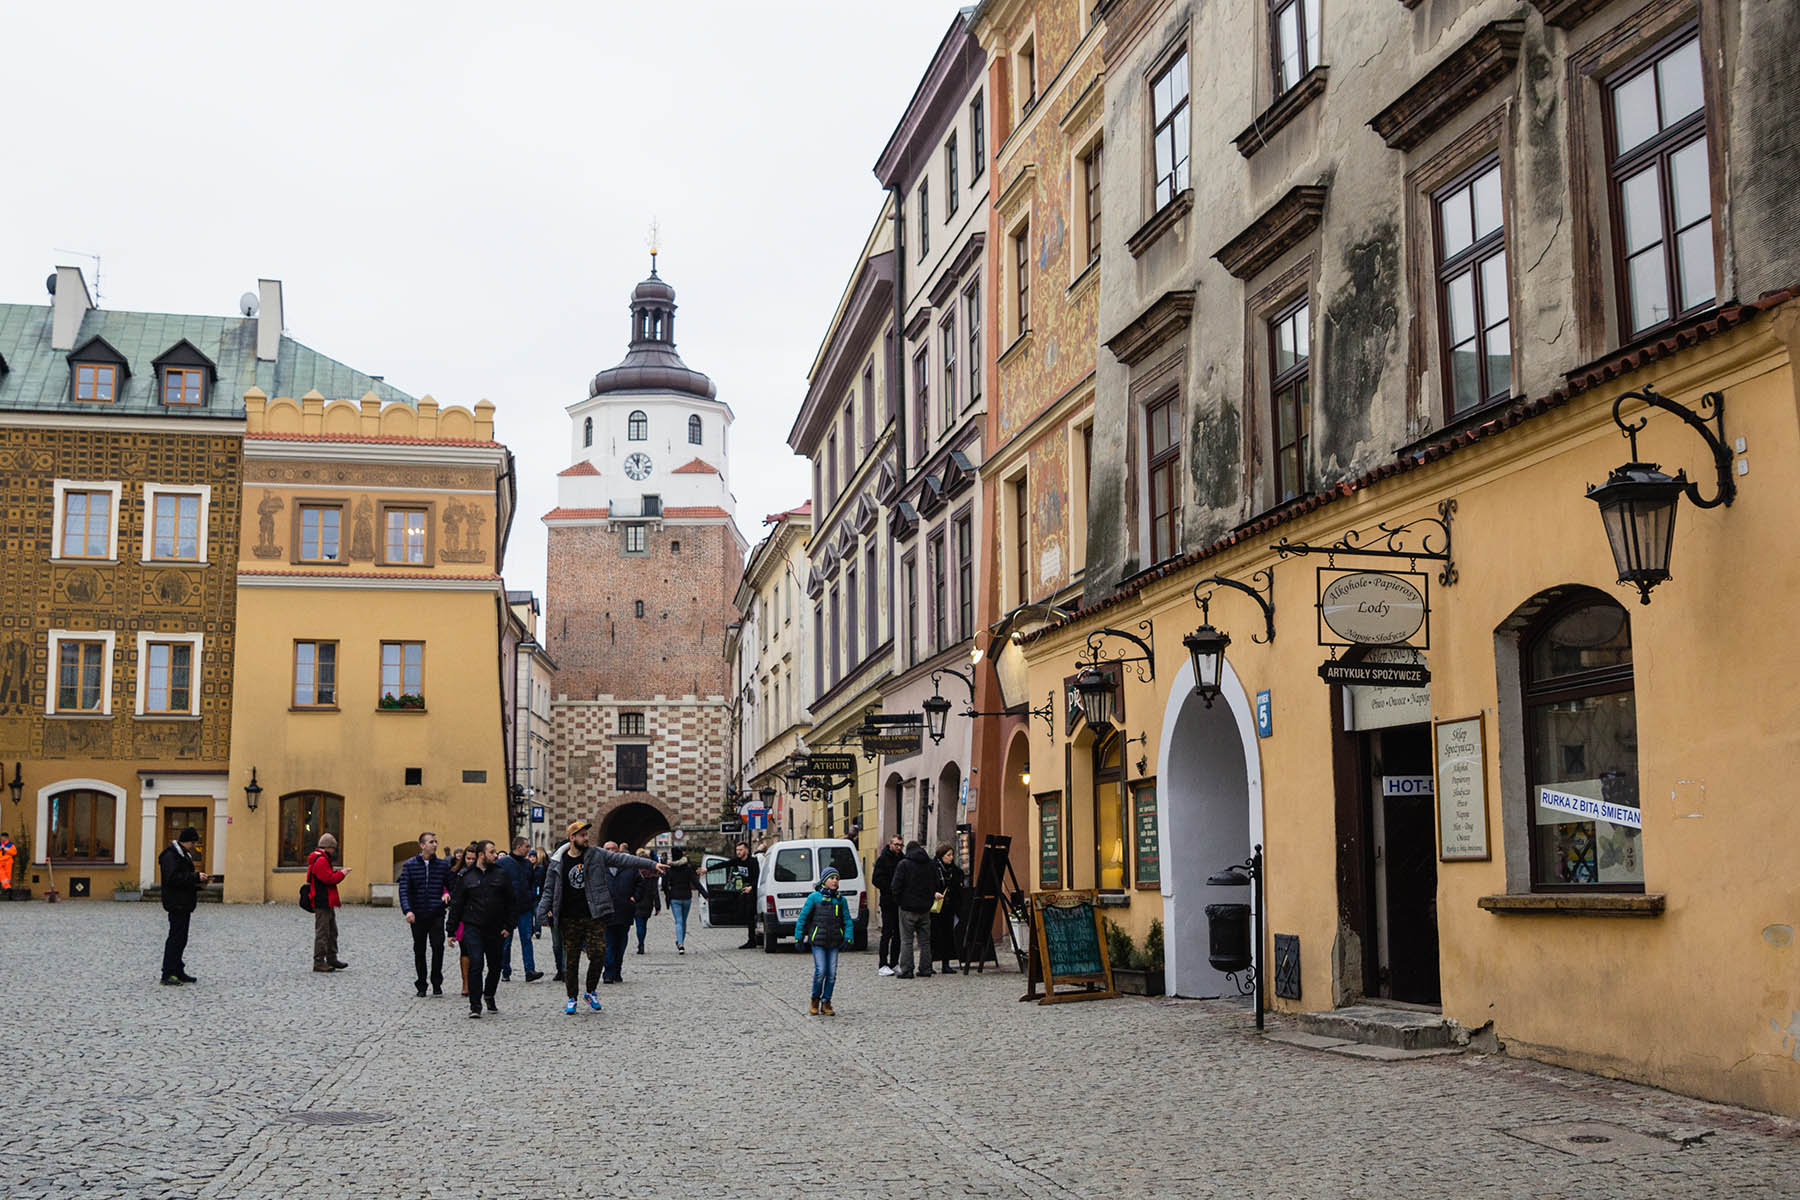 Streets of Lublin old town